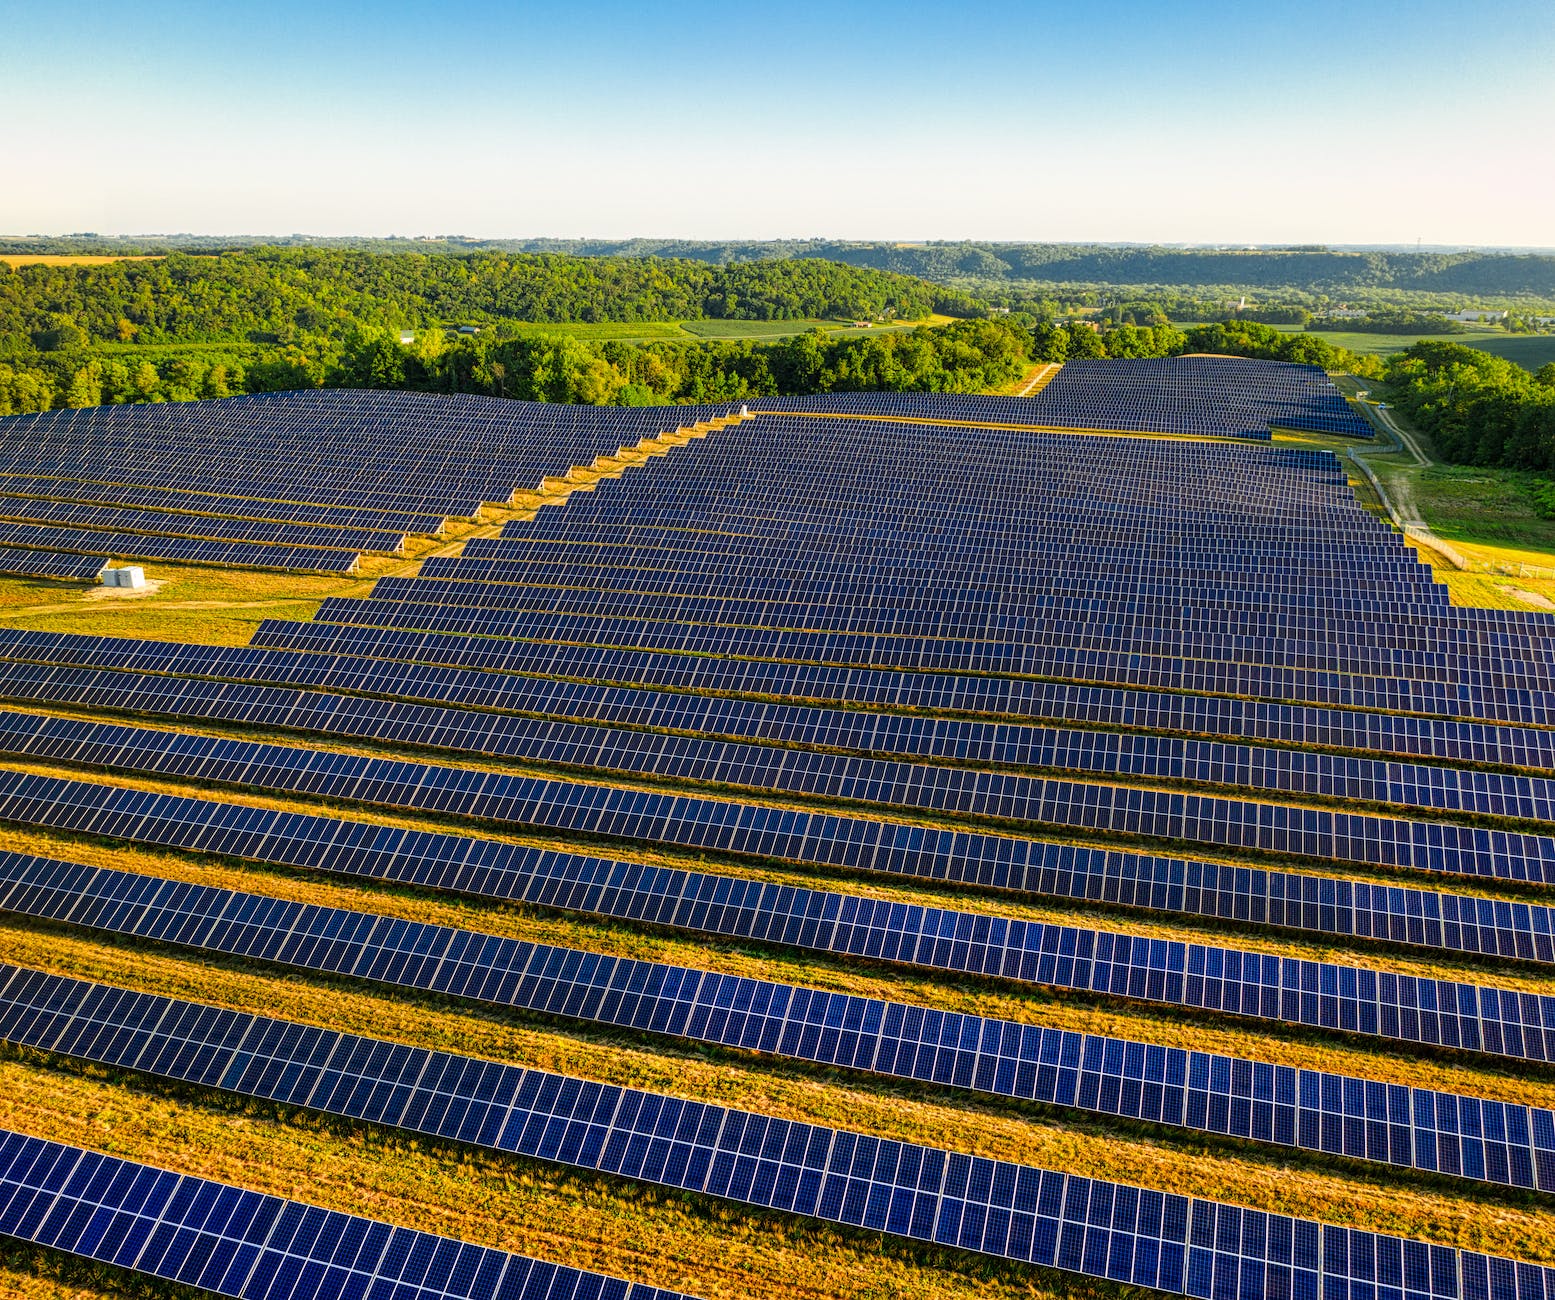 Harnessing the Sun: Renewable Energy Certificates and Carbon Emissions Credits from Solar Farms